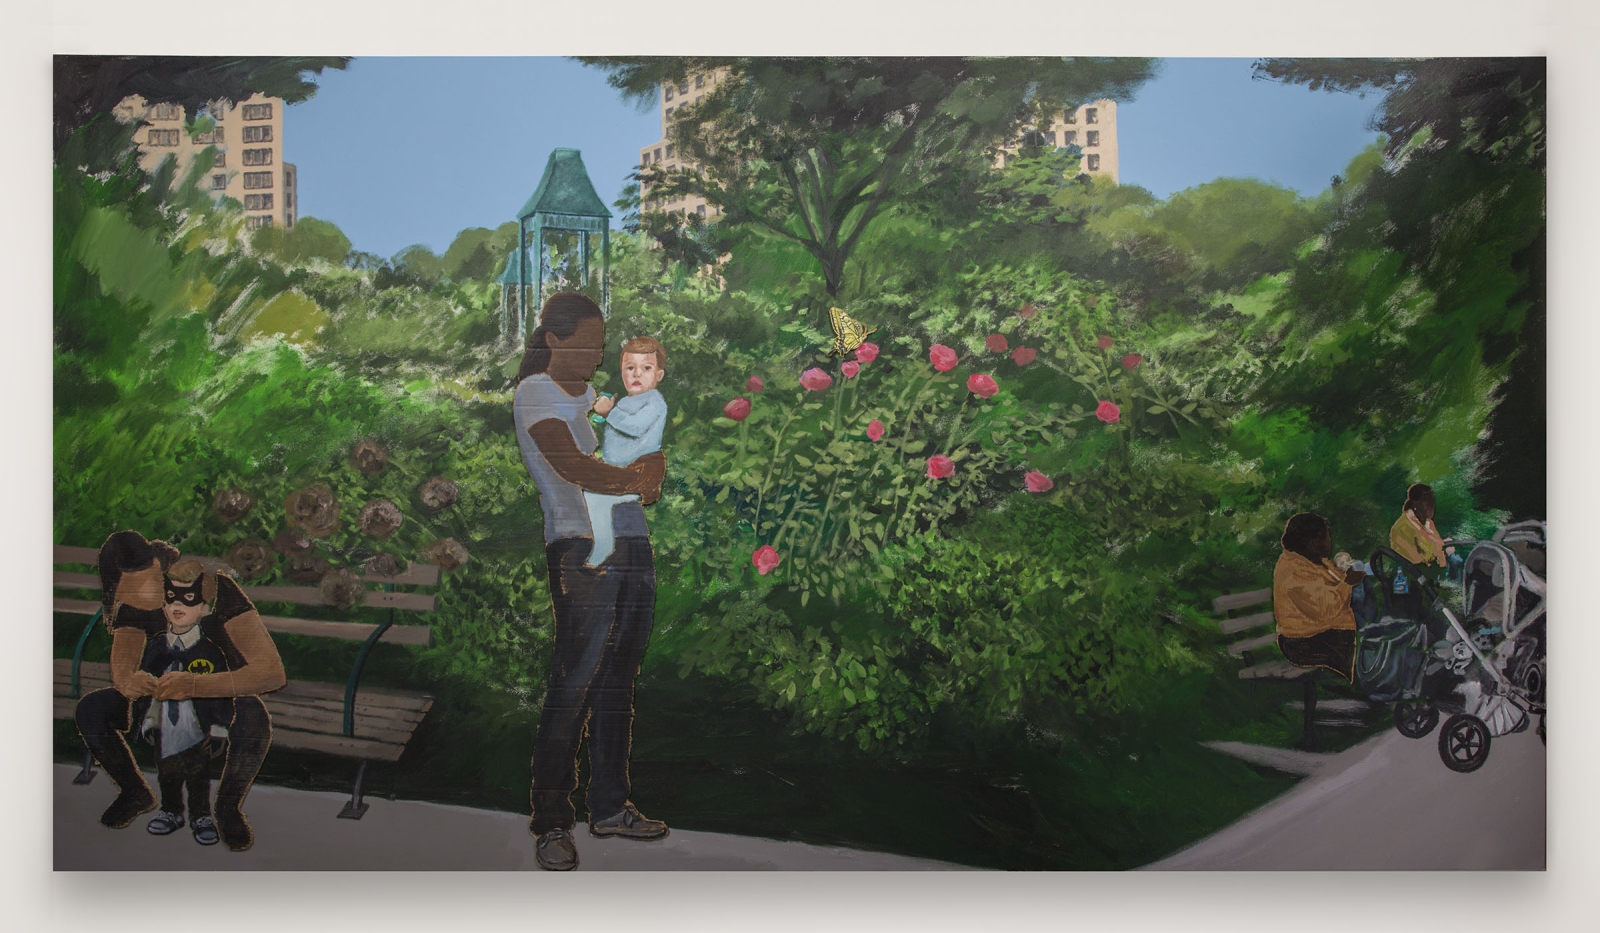 Ramiro Gomez
An Afternoon in Madison Square Park, 2017
mixed media on canvas
84 x 156 in.
213.4 x 396.2 cm